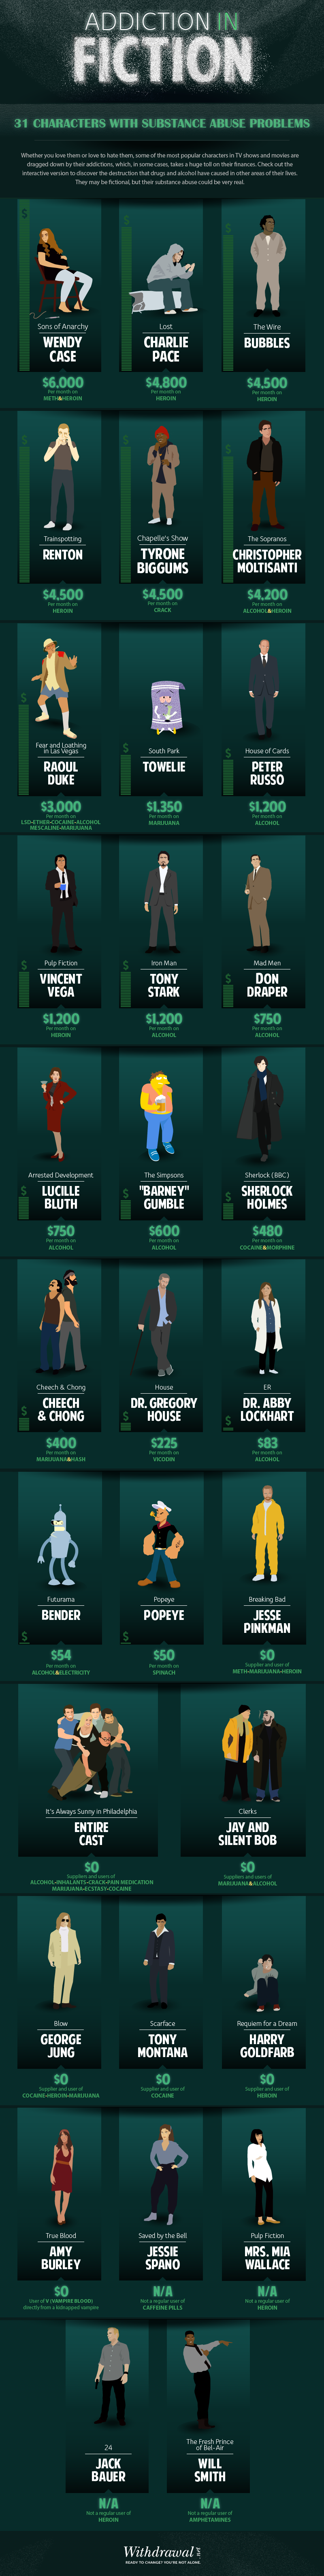 31 Characters with Substance Abuse Problems #infographic